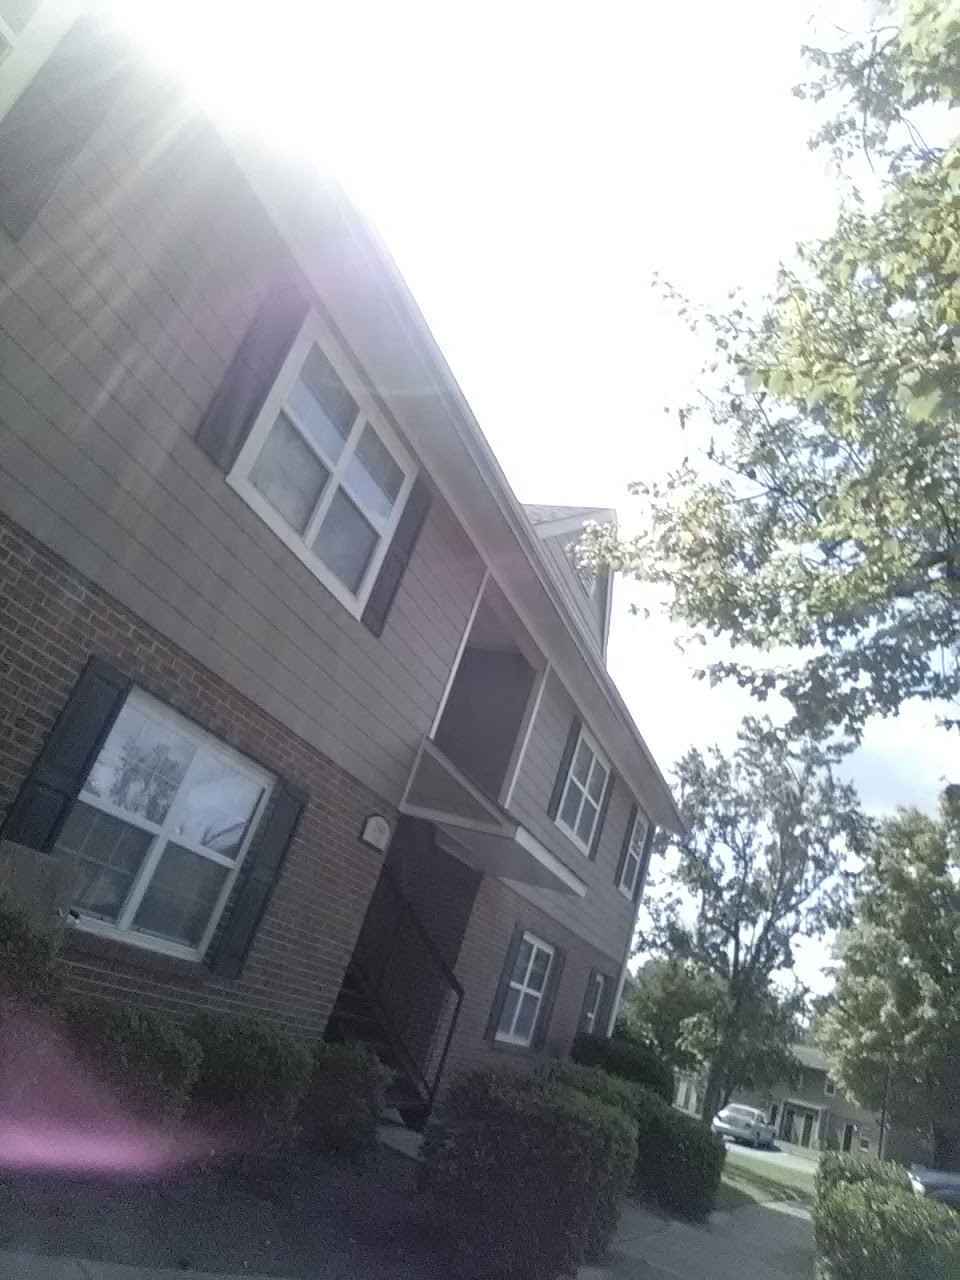 Photo of FAYETTEVILLE GARDENS APARTMENTS at 2941 A GORDON WAY FAYETTEVILLE, NC 28303